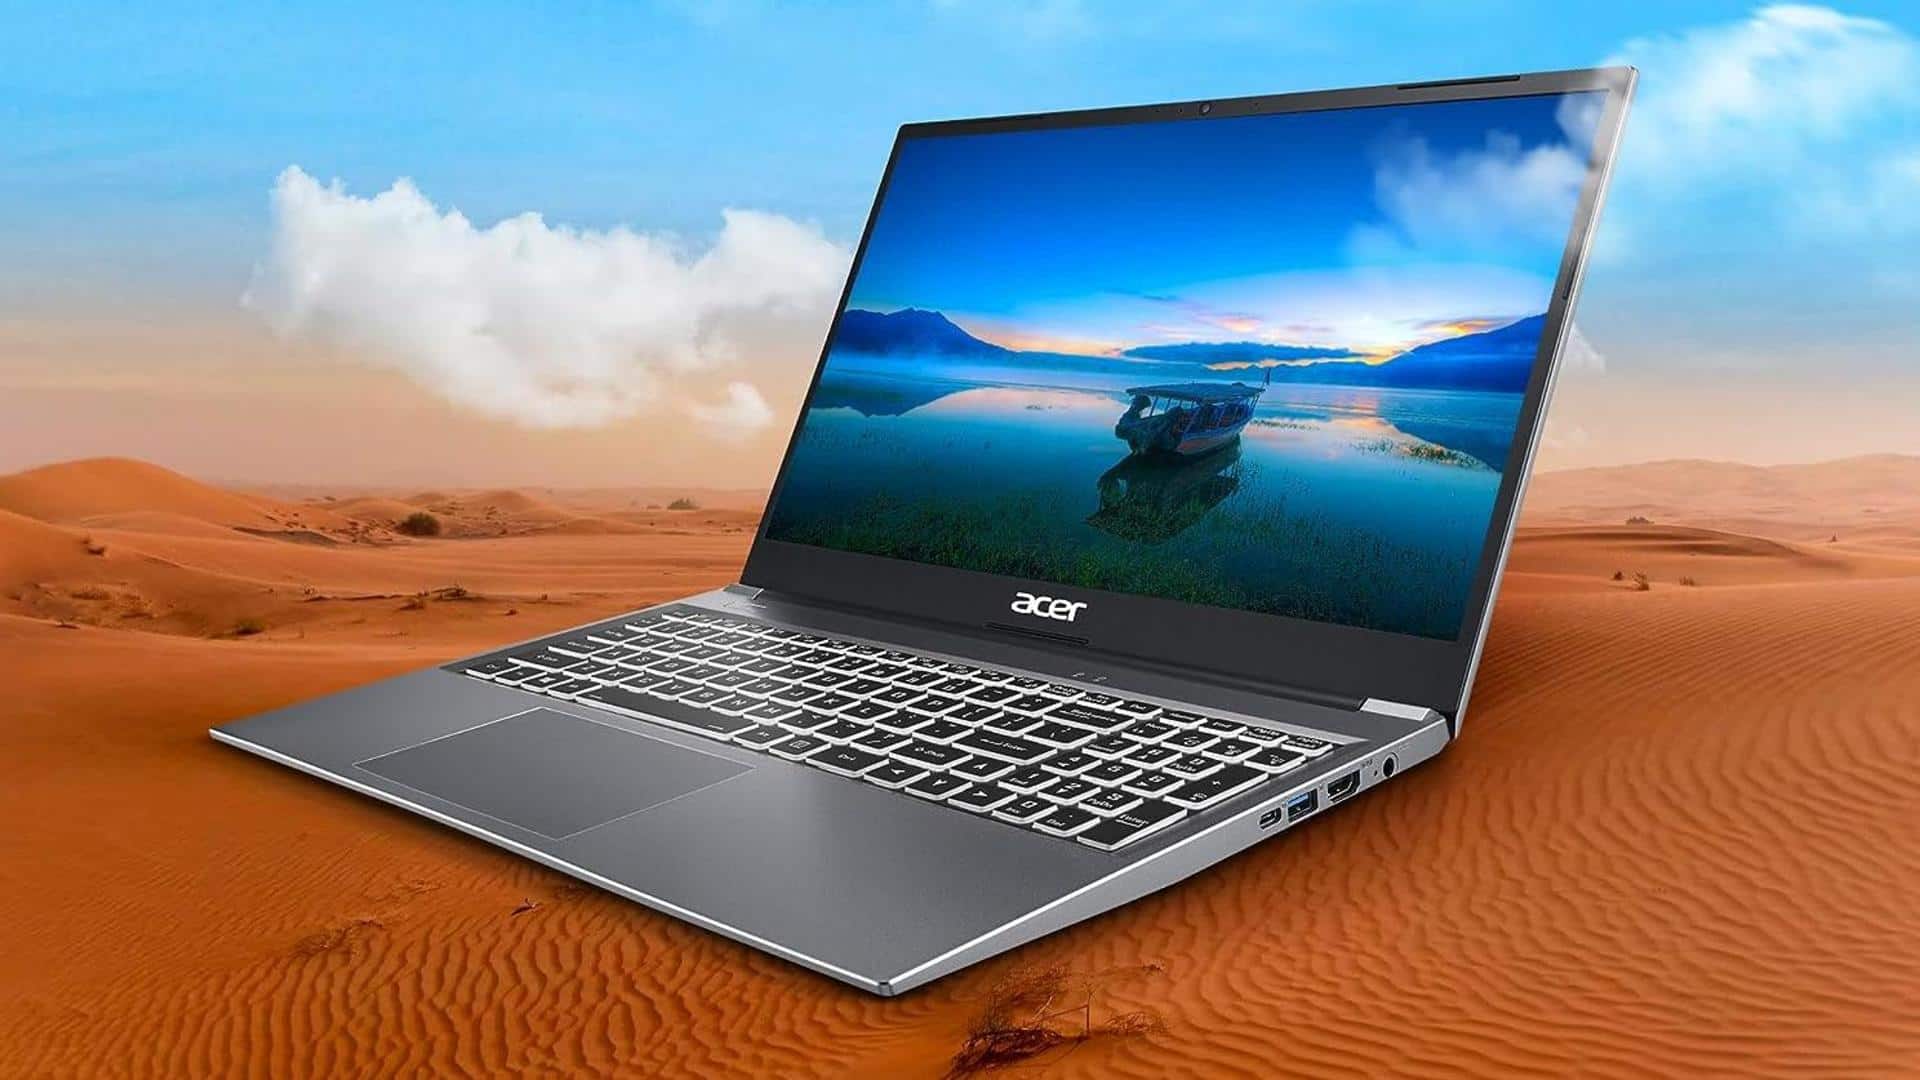 Acer Aspire Lite gets cheaper on Amazon: Check offers